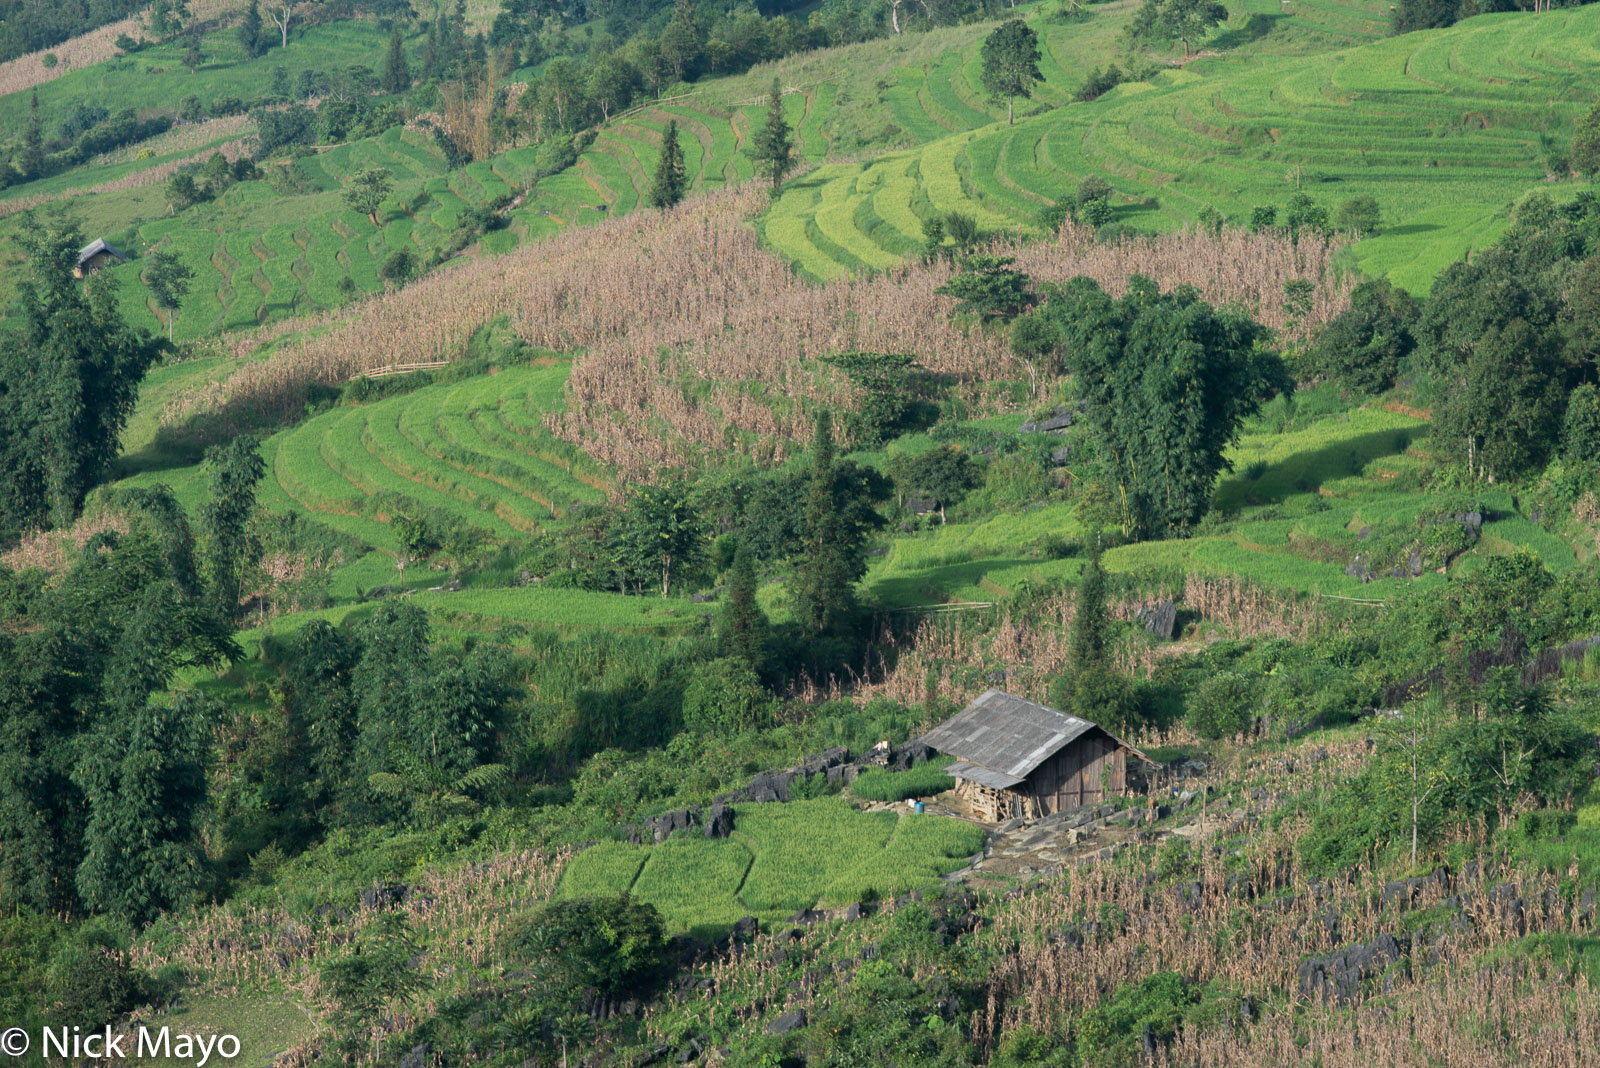 A house set amongst the cornfields and paddy rice terraces of Nam Ma.